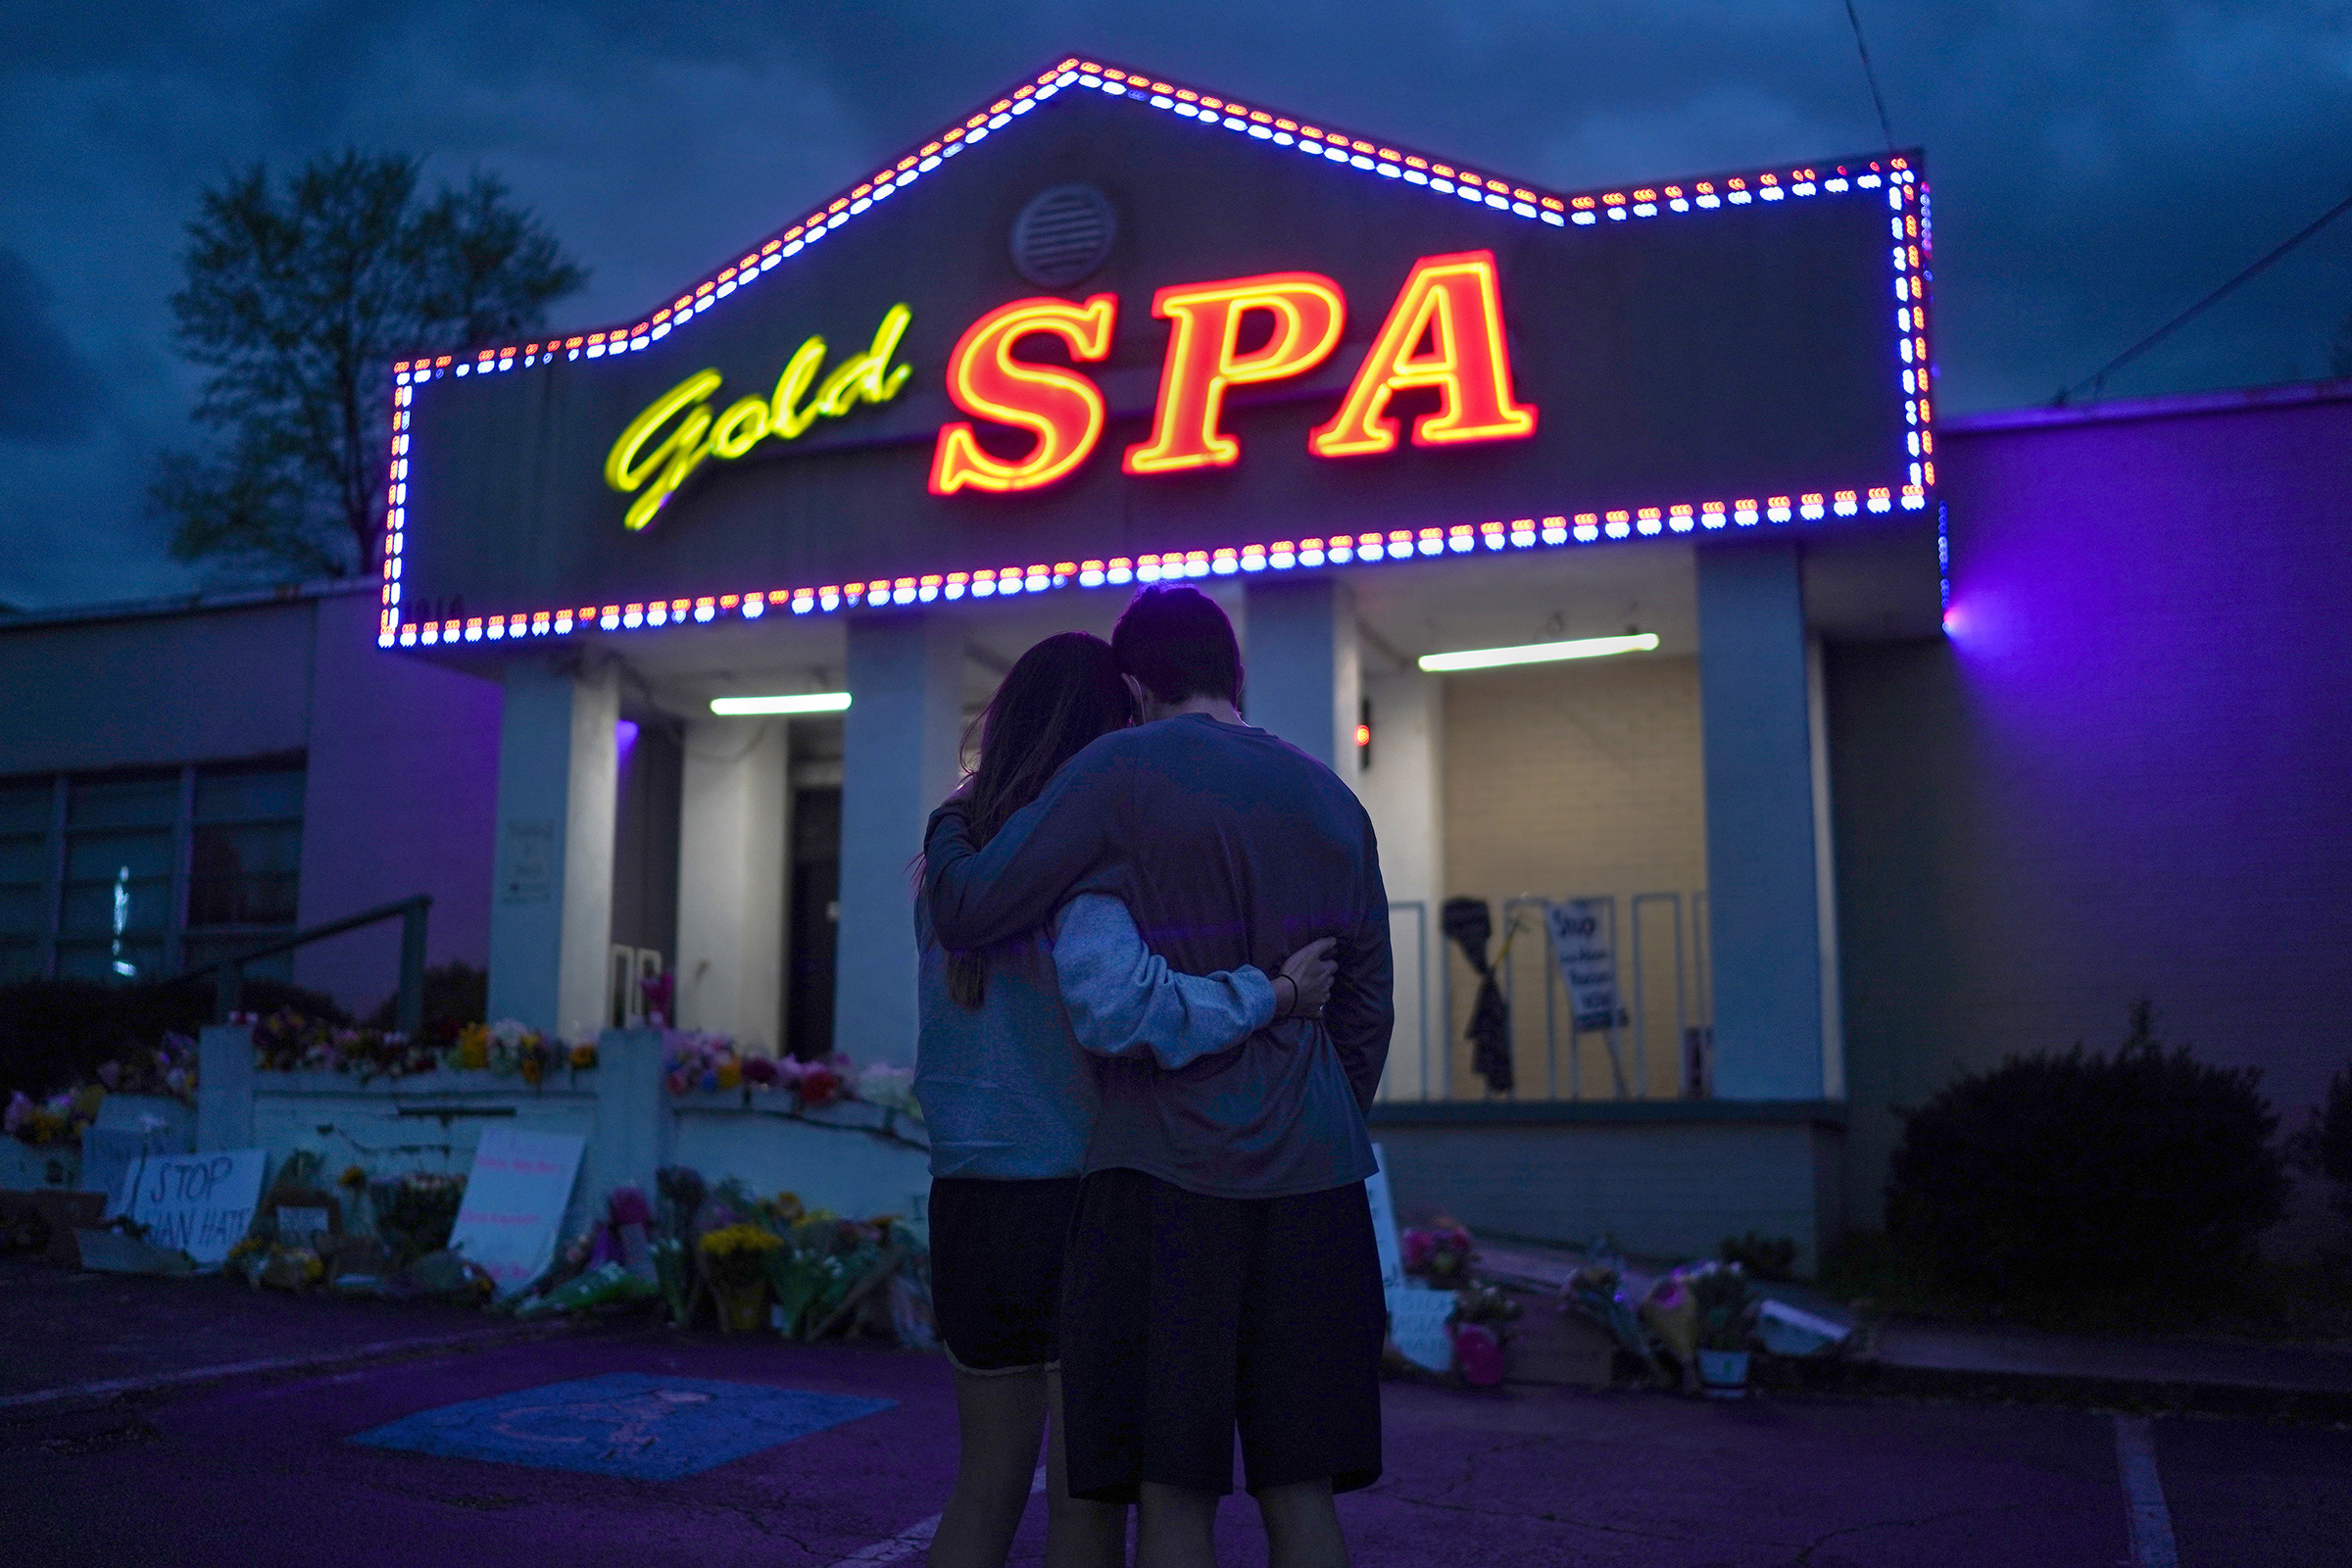 Cynthia Shi and her boyfriend, Graham Bloomsmith, embrace outside Gold Spa near Acworth, Ga., on March 18, 2021. Two days earlier, a gunman killed eight people—including six women of Asian descent—and injured one person in shootings at three Atlanta-area massage businesses amid a pandemic spike in attacks on Asian Americans.